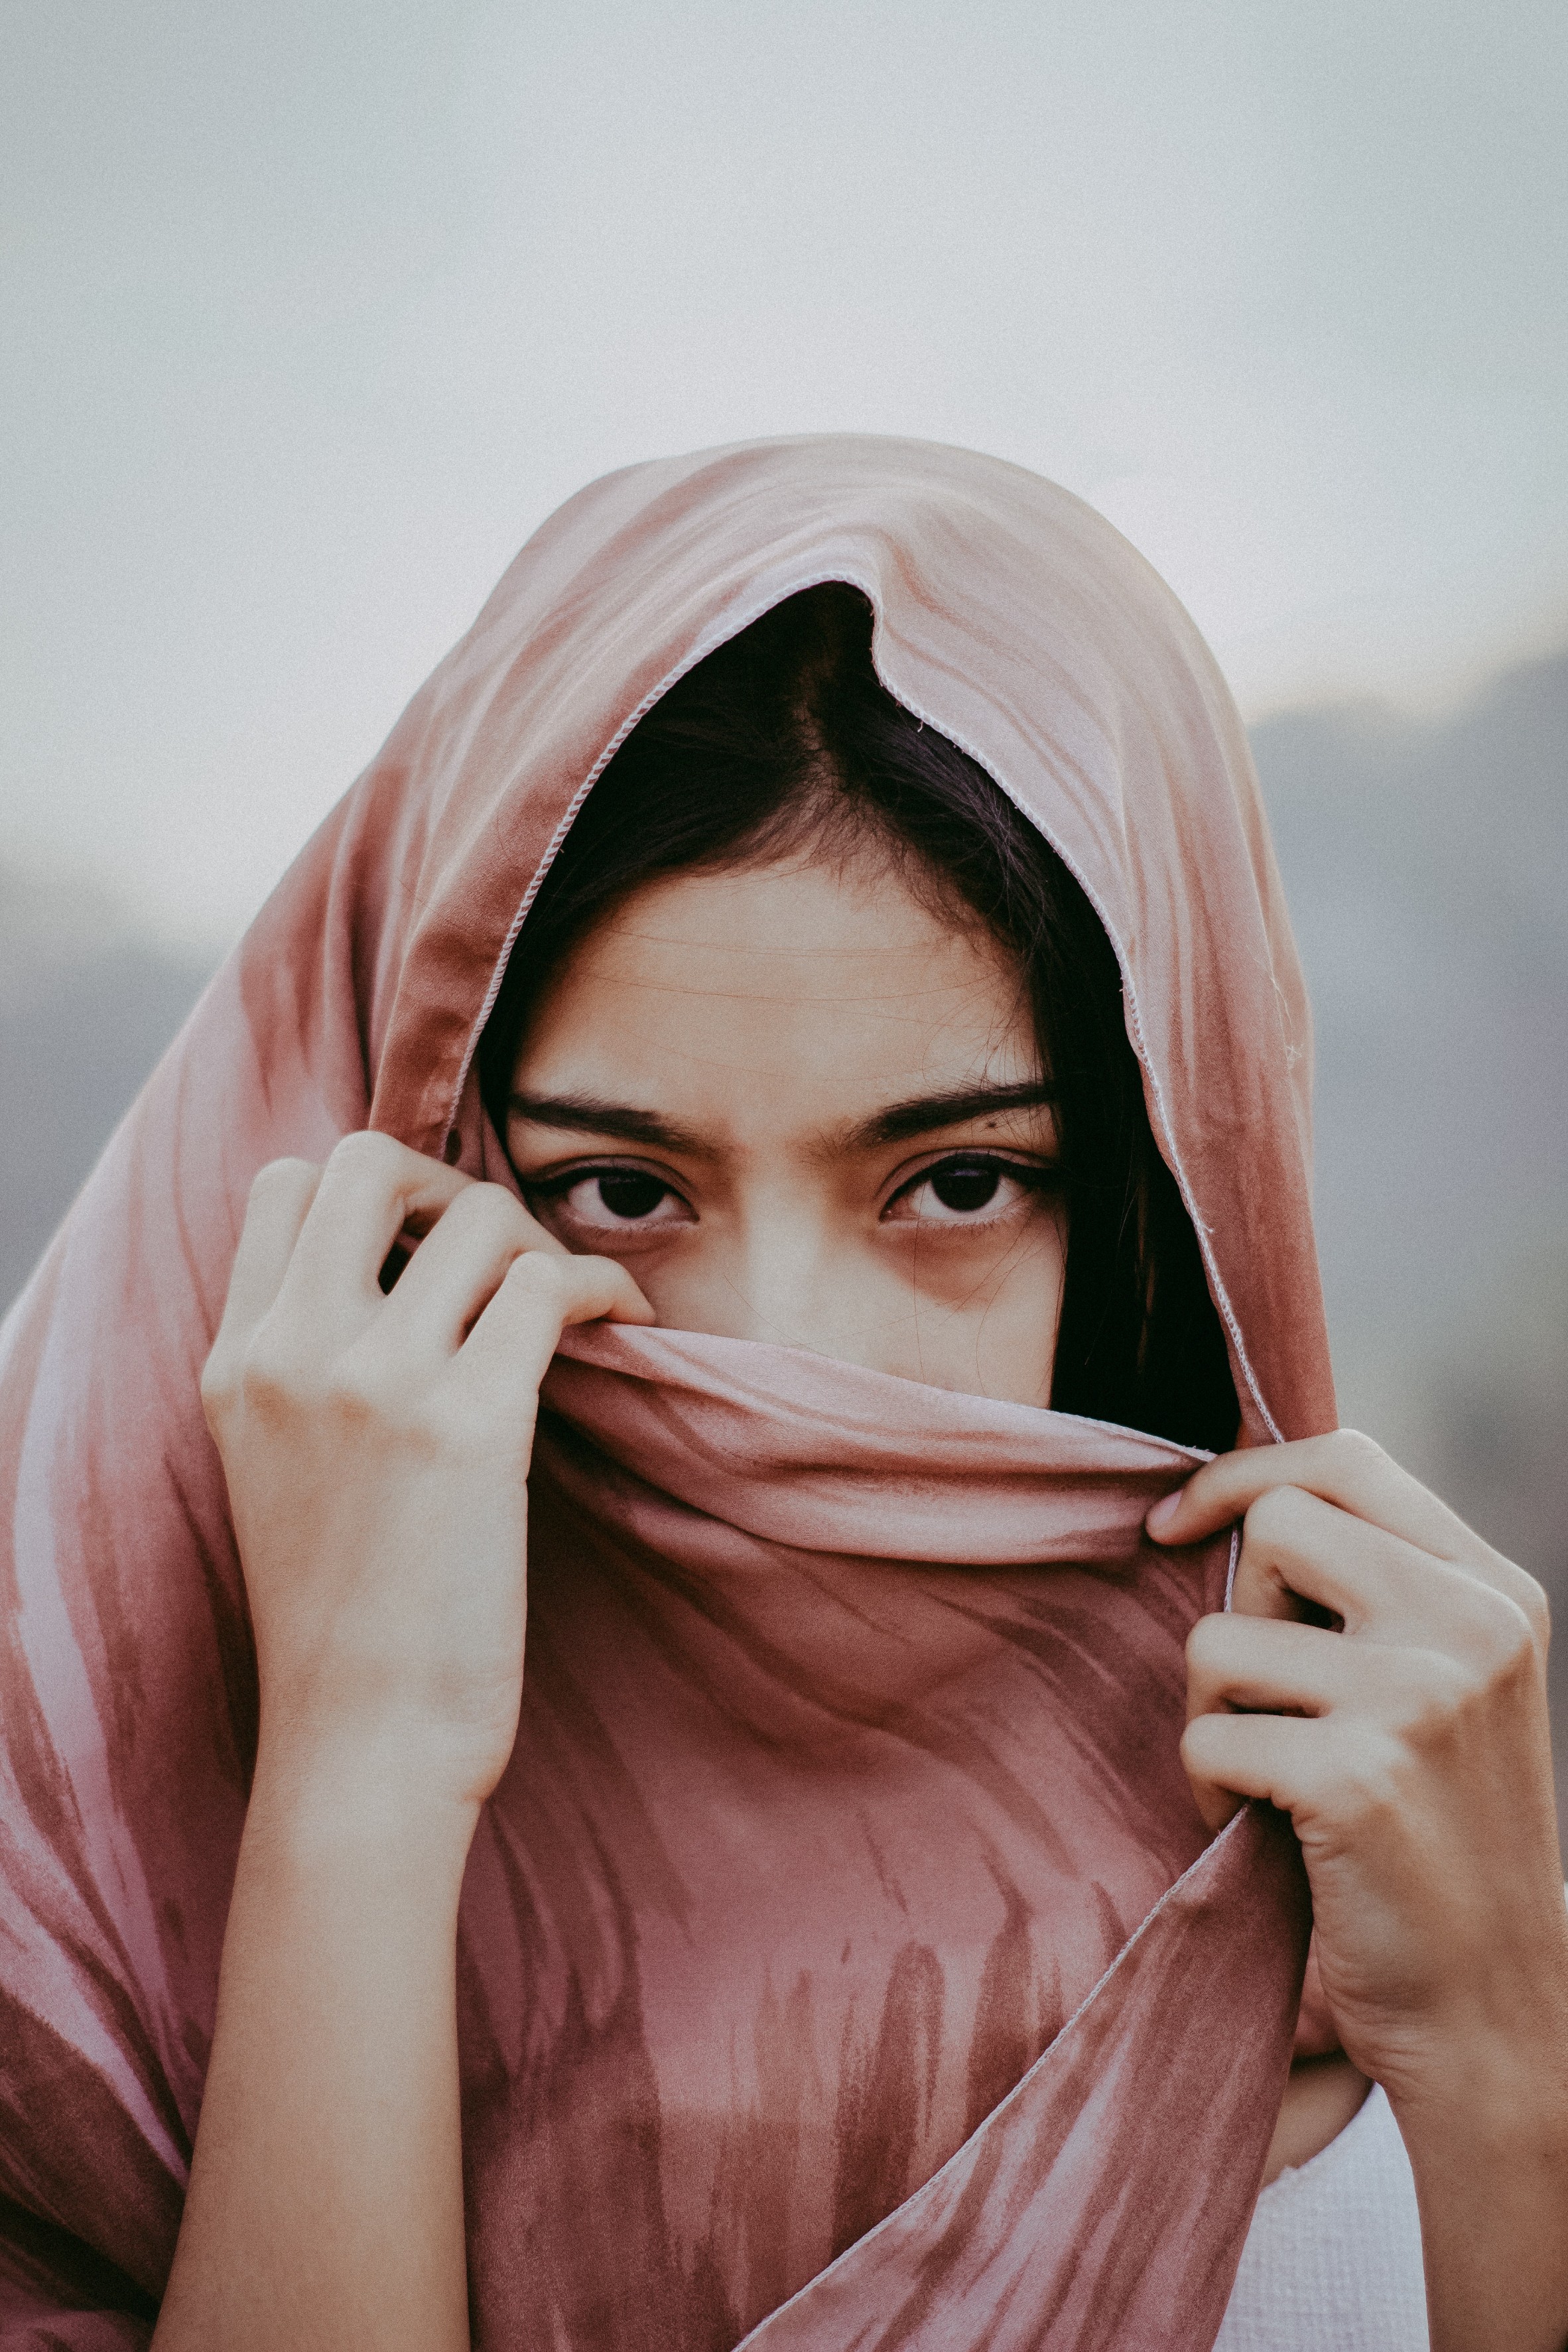 Women Scarf Covered Mouth Looking At Viewer Vertical Brunette 2364x3546